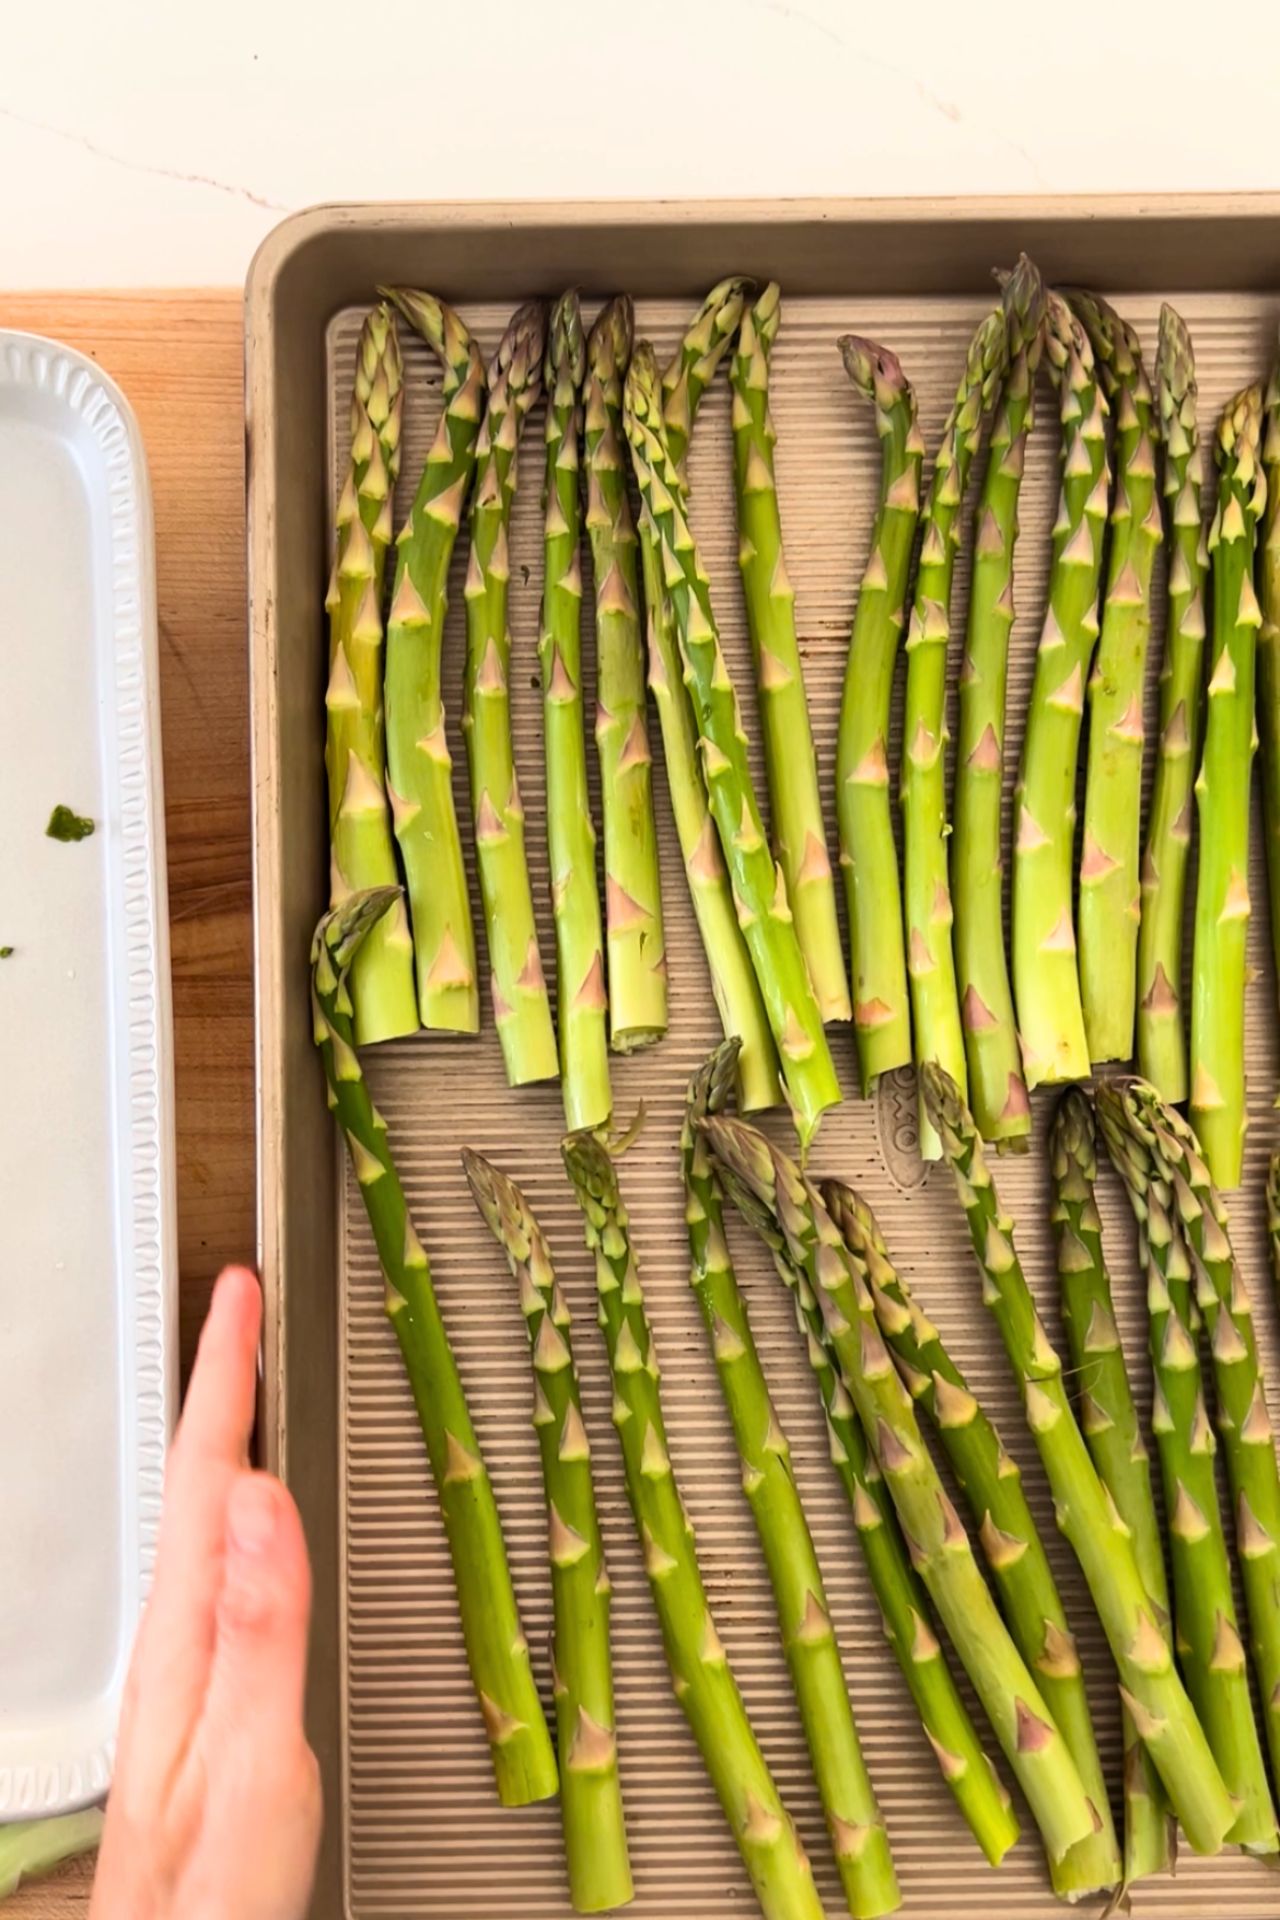 baking sheet with clean asparagus spears with the bottom removed